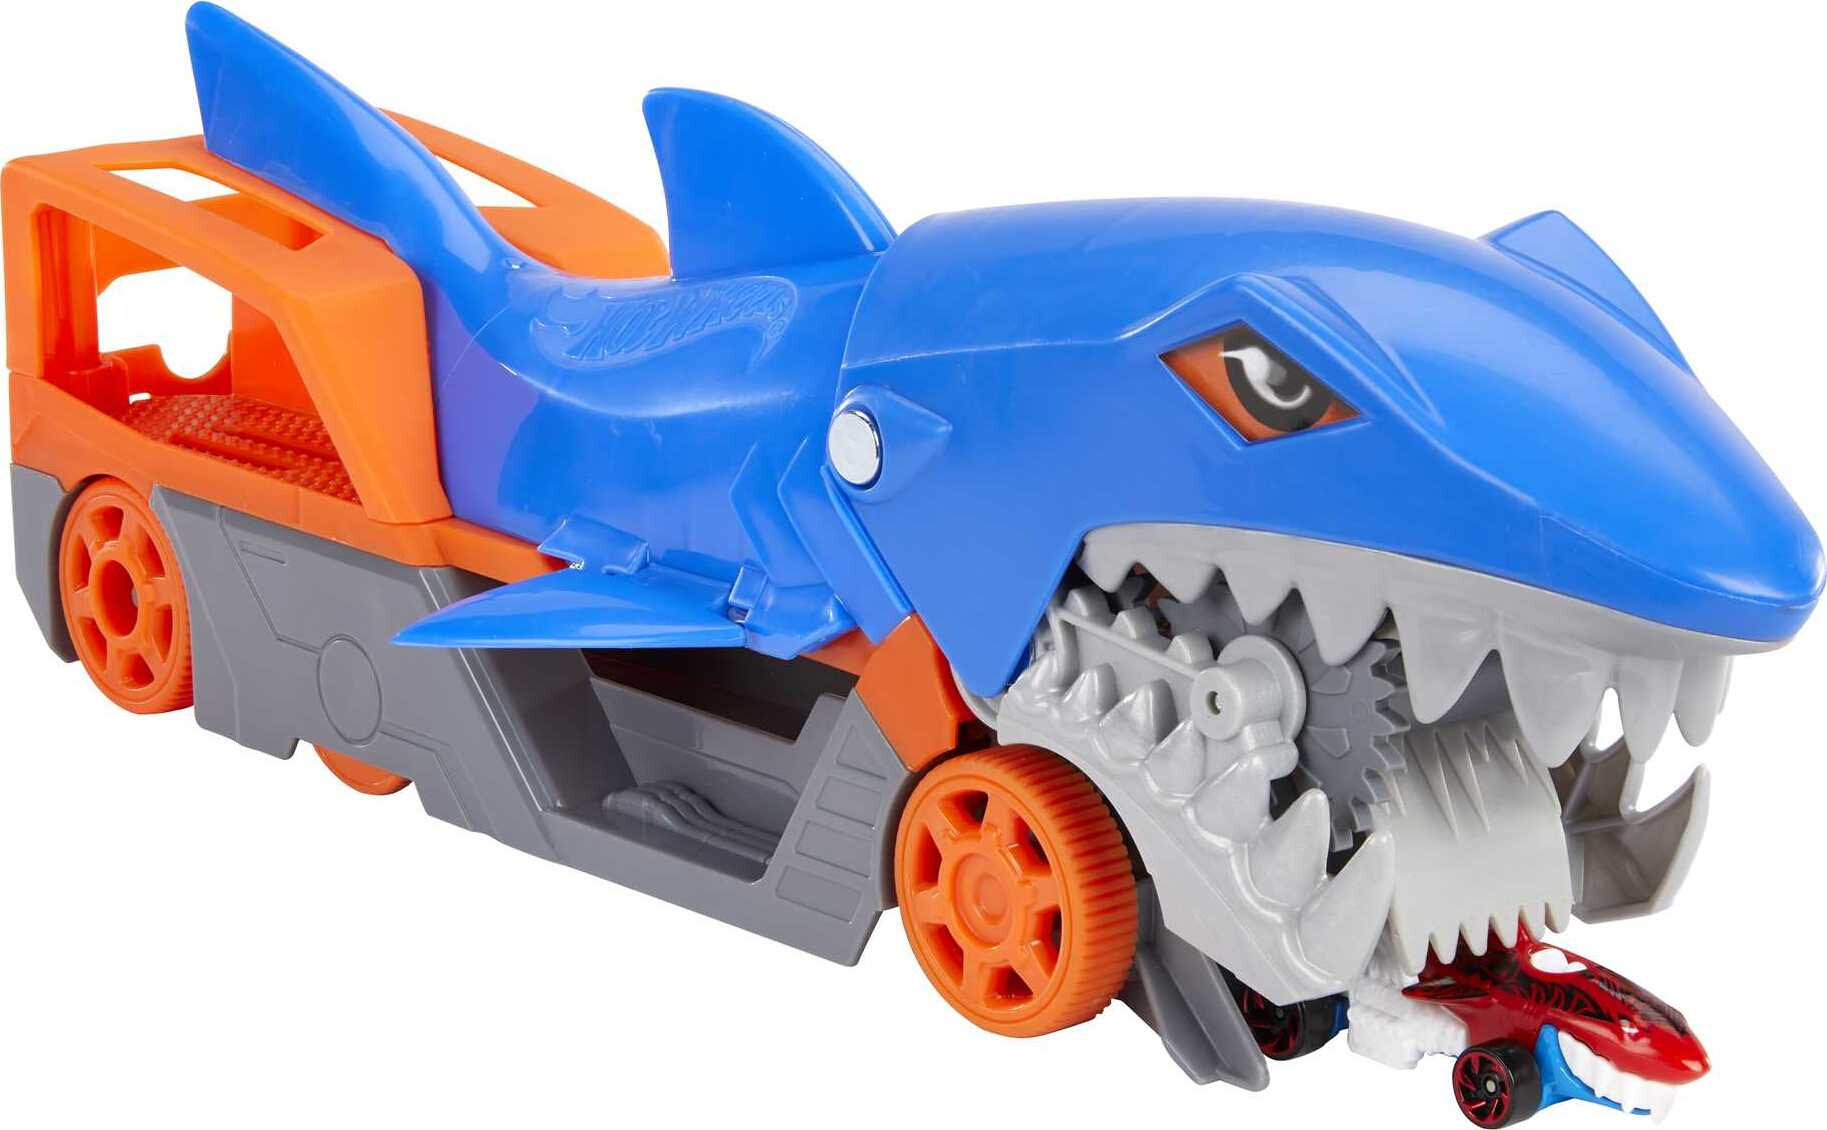 Hot Wheels Shark Chomp Transporter Playset with 1 Toy Car in 1:64 Scale - image 1 of 7